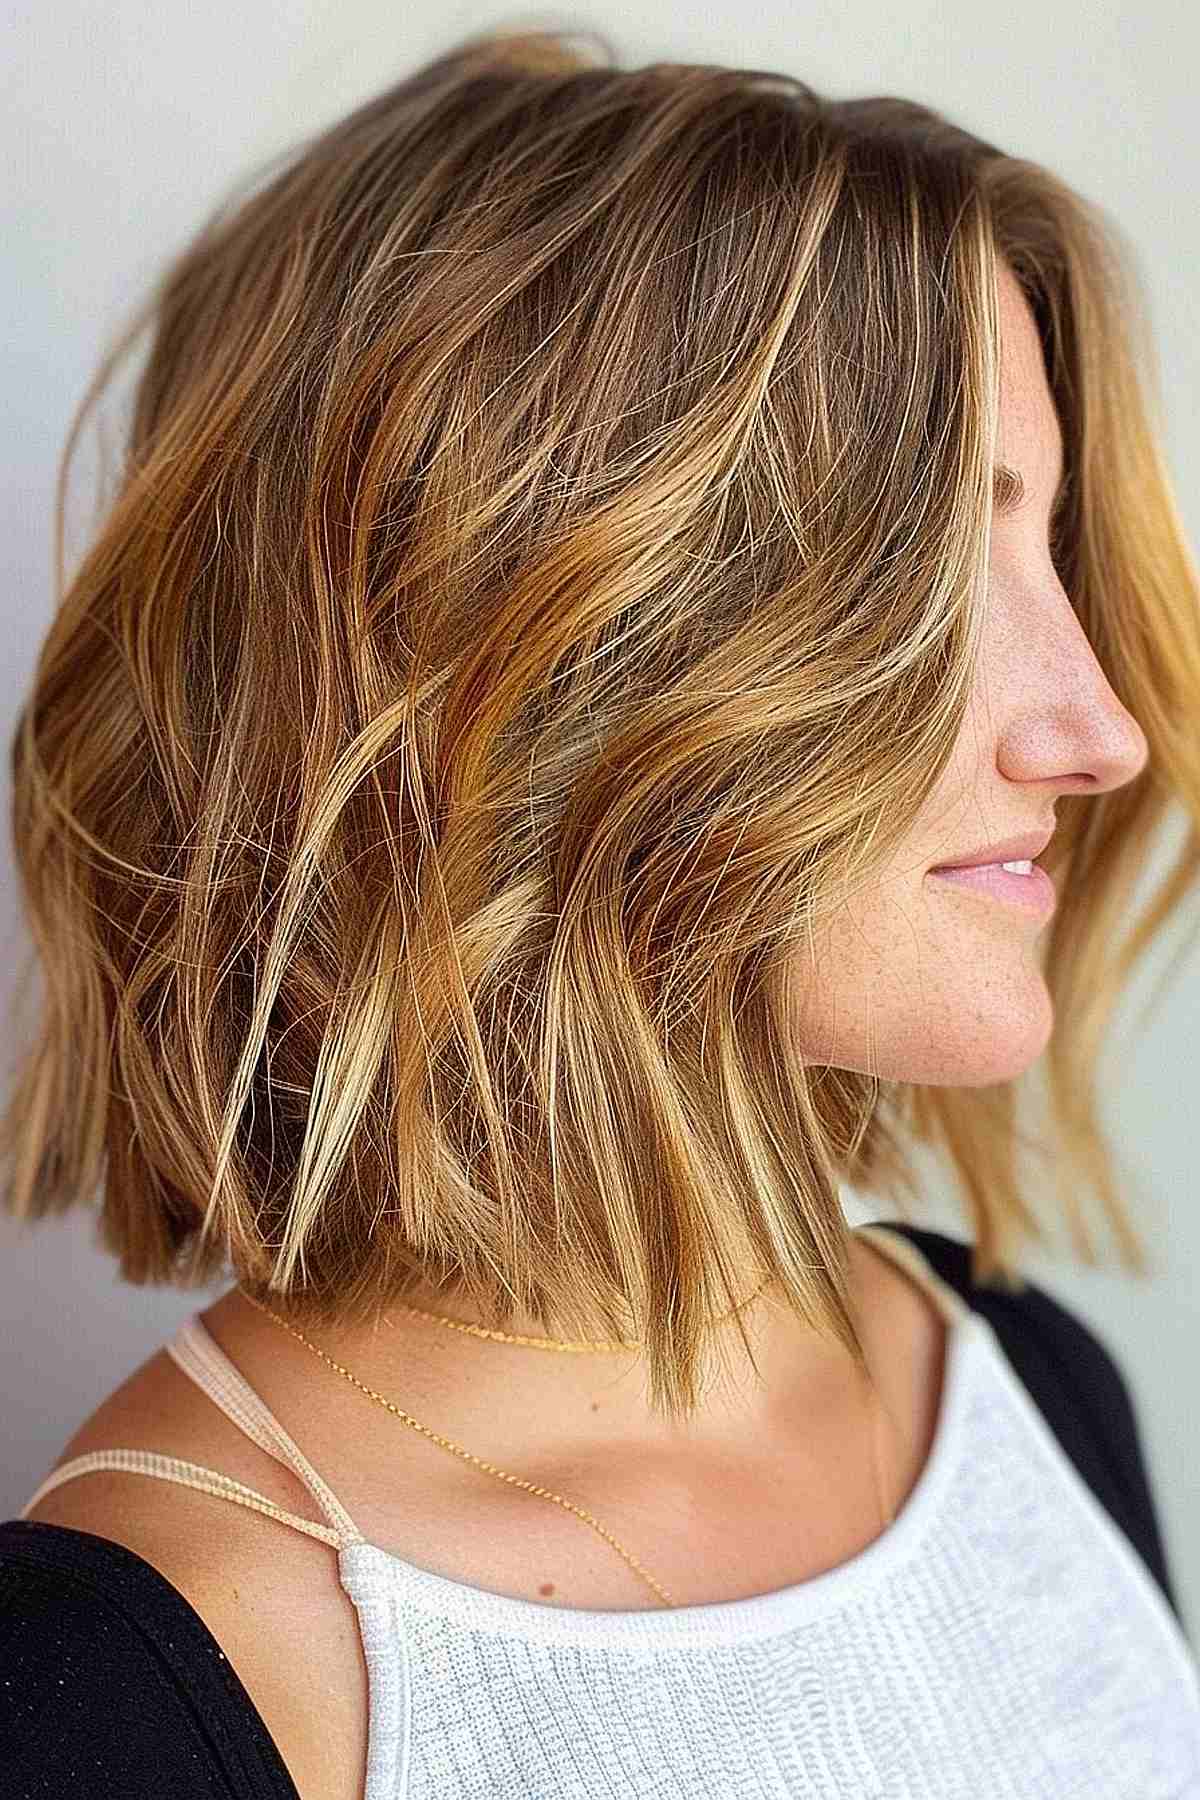 Profile view of a woman with a choppy lob haircut featuring balayage highlights